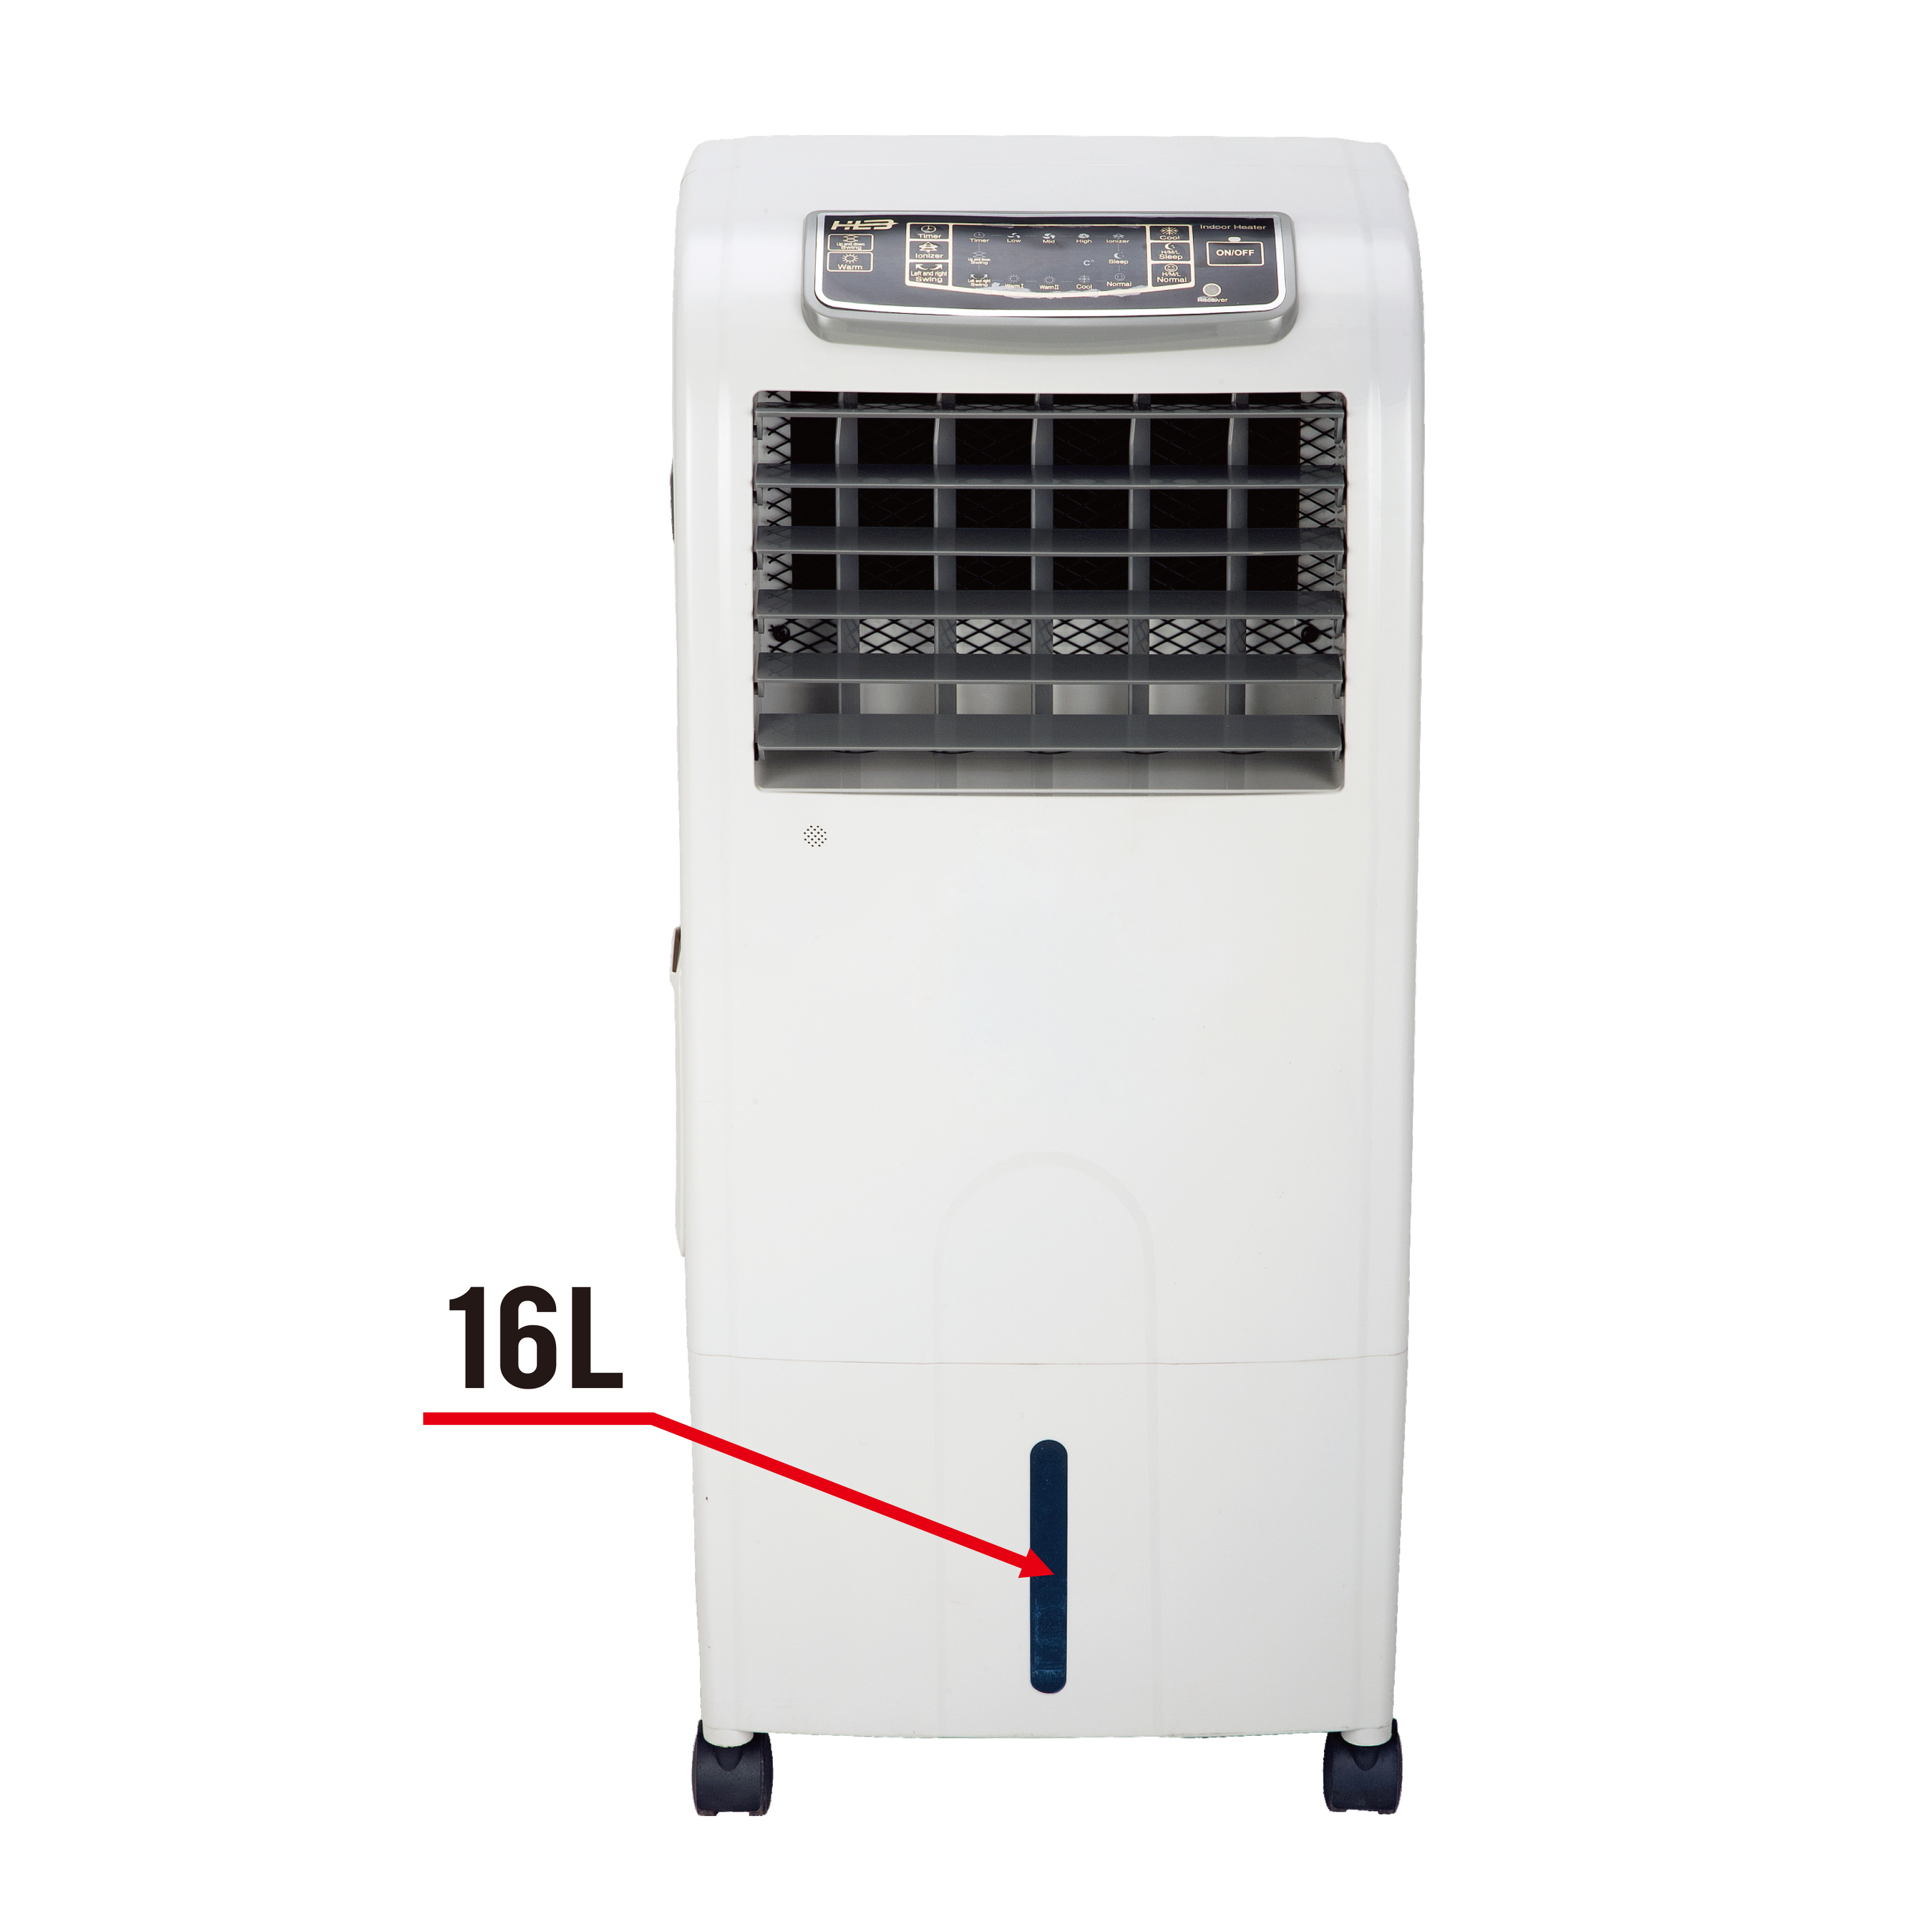 The Water Cooling & PTC Heating Electrical Air Cooler Heater 16L